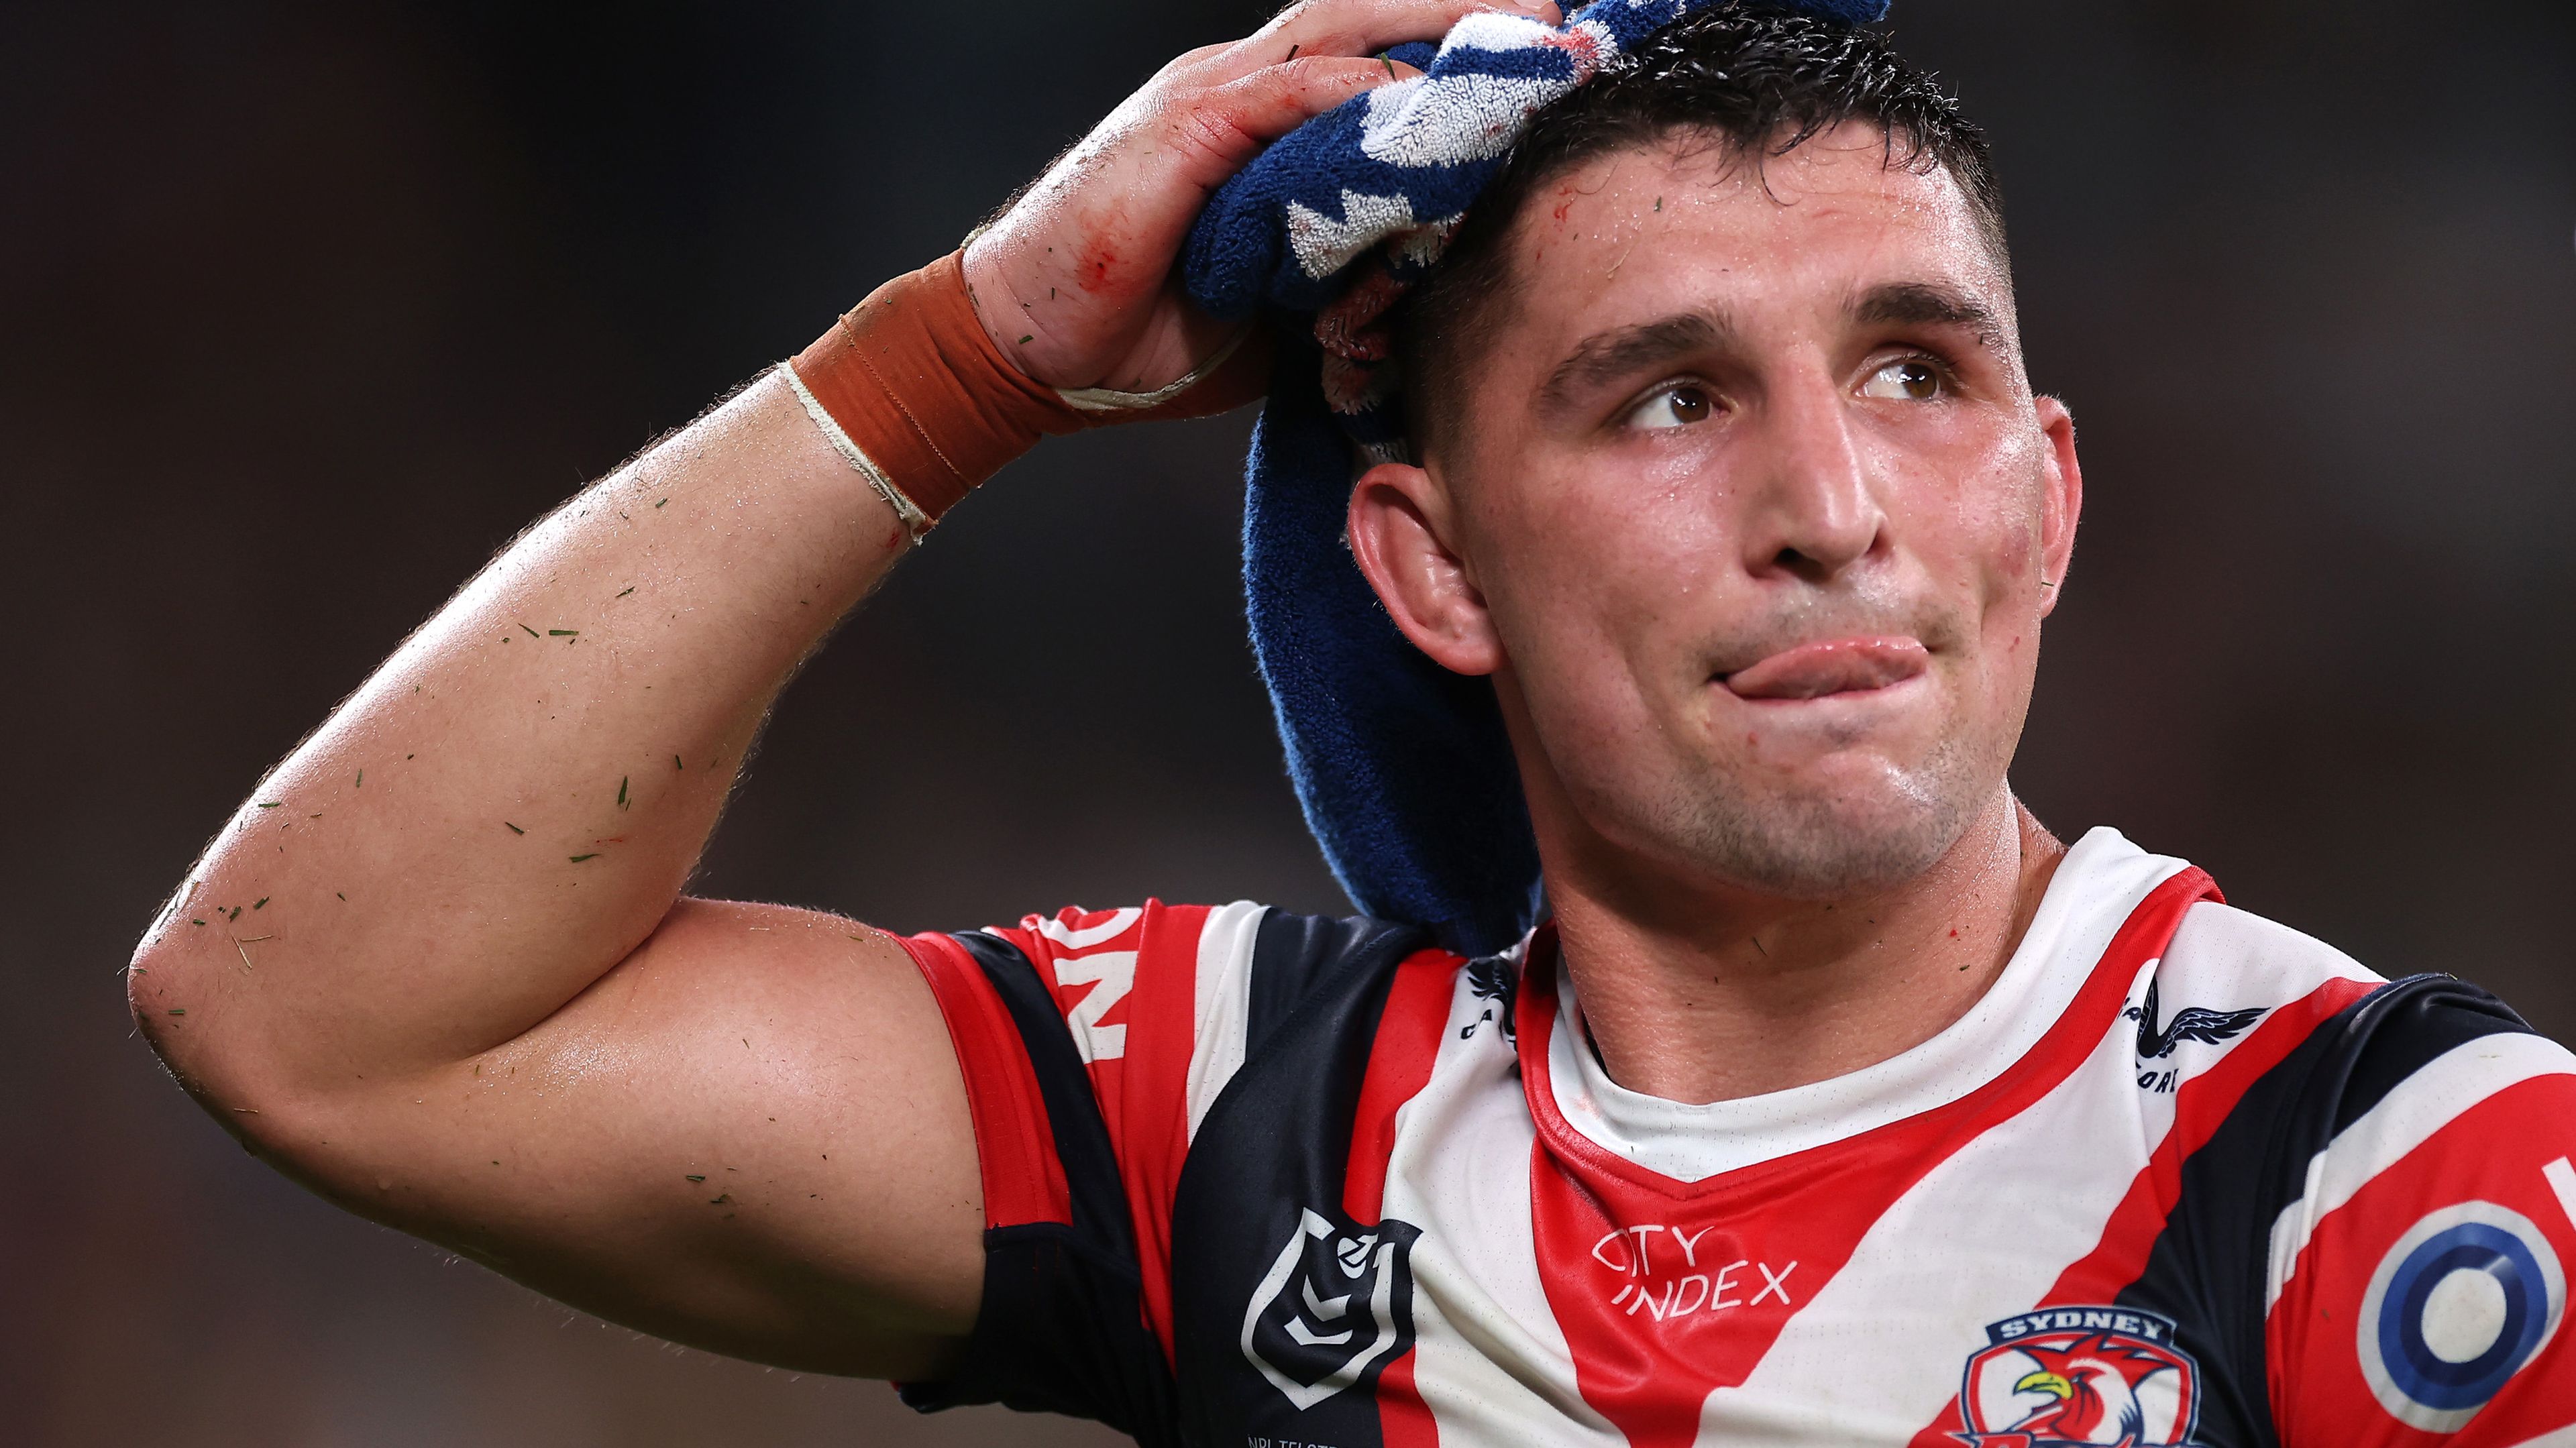 SYDNEY, AUSTRALIA - MARCH 17:  Victor Radley of the Roosters is taken off the field for a HIA during the round three NRL match between Sydney Roosters and South Sydney Rabbitohs at Allianz Stadium on March 17, 2023 in Sydney, Australia. (Photo by Mark Kolbe/Getty Images)